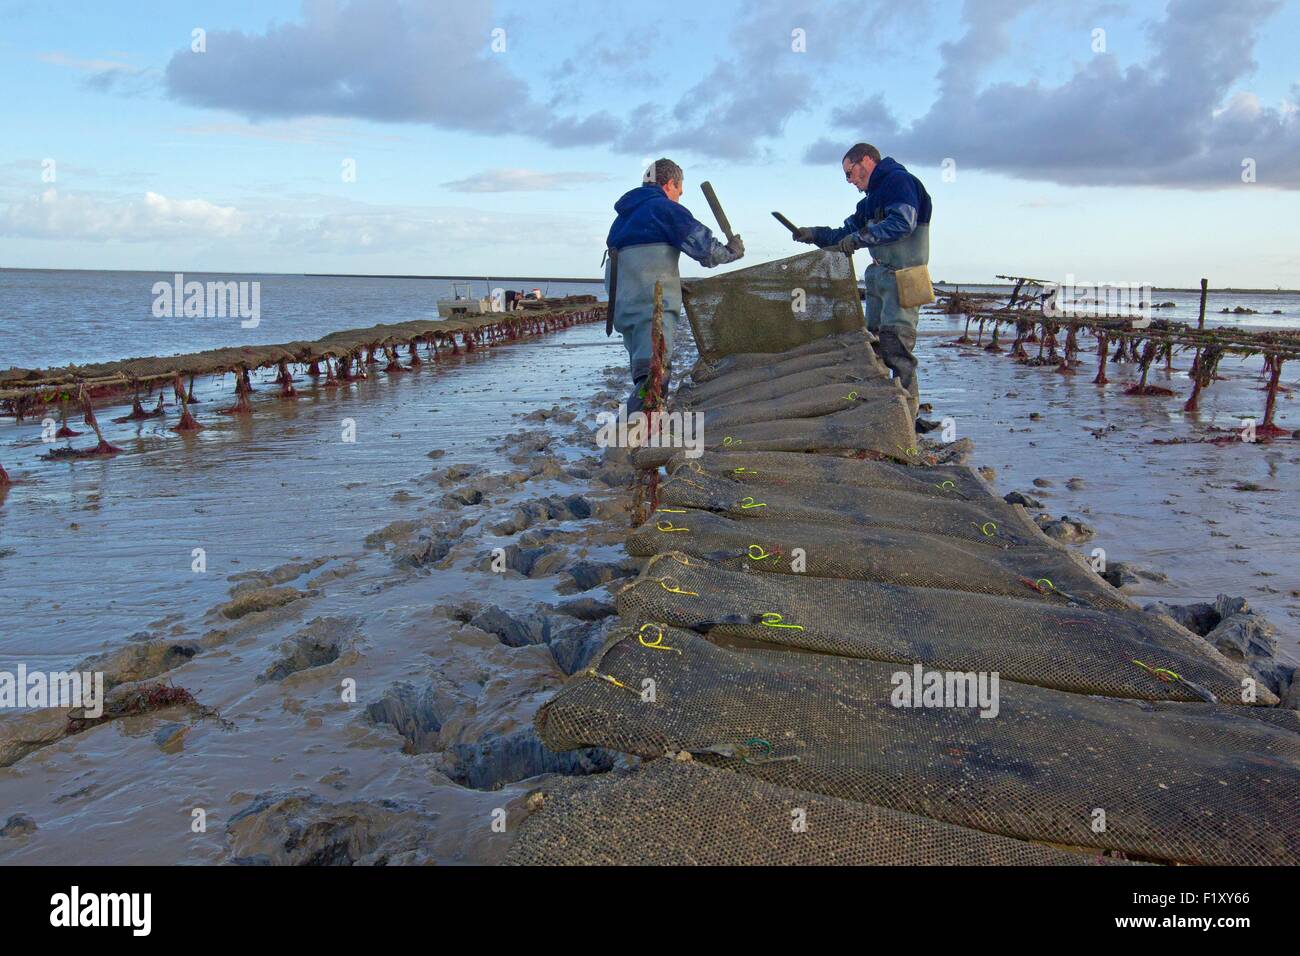 France, Vendee, Mountains bar, Oyster farming, ostrΘiculture Stock Photo